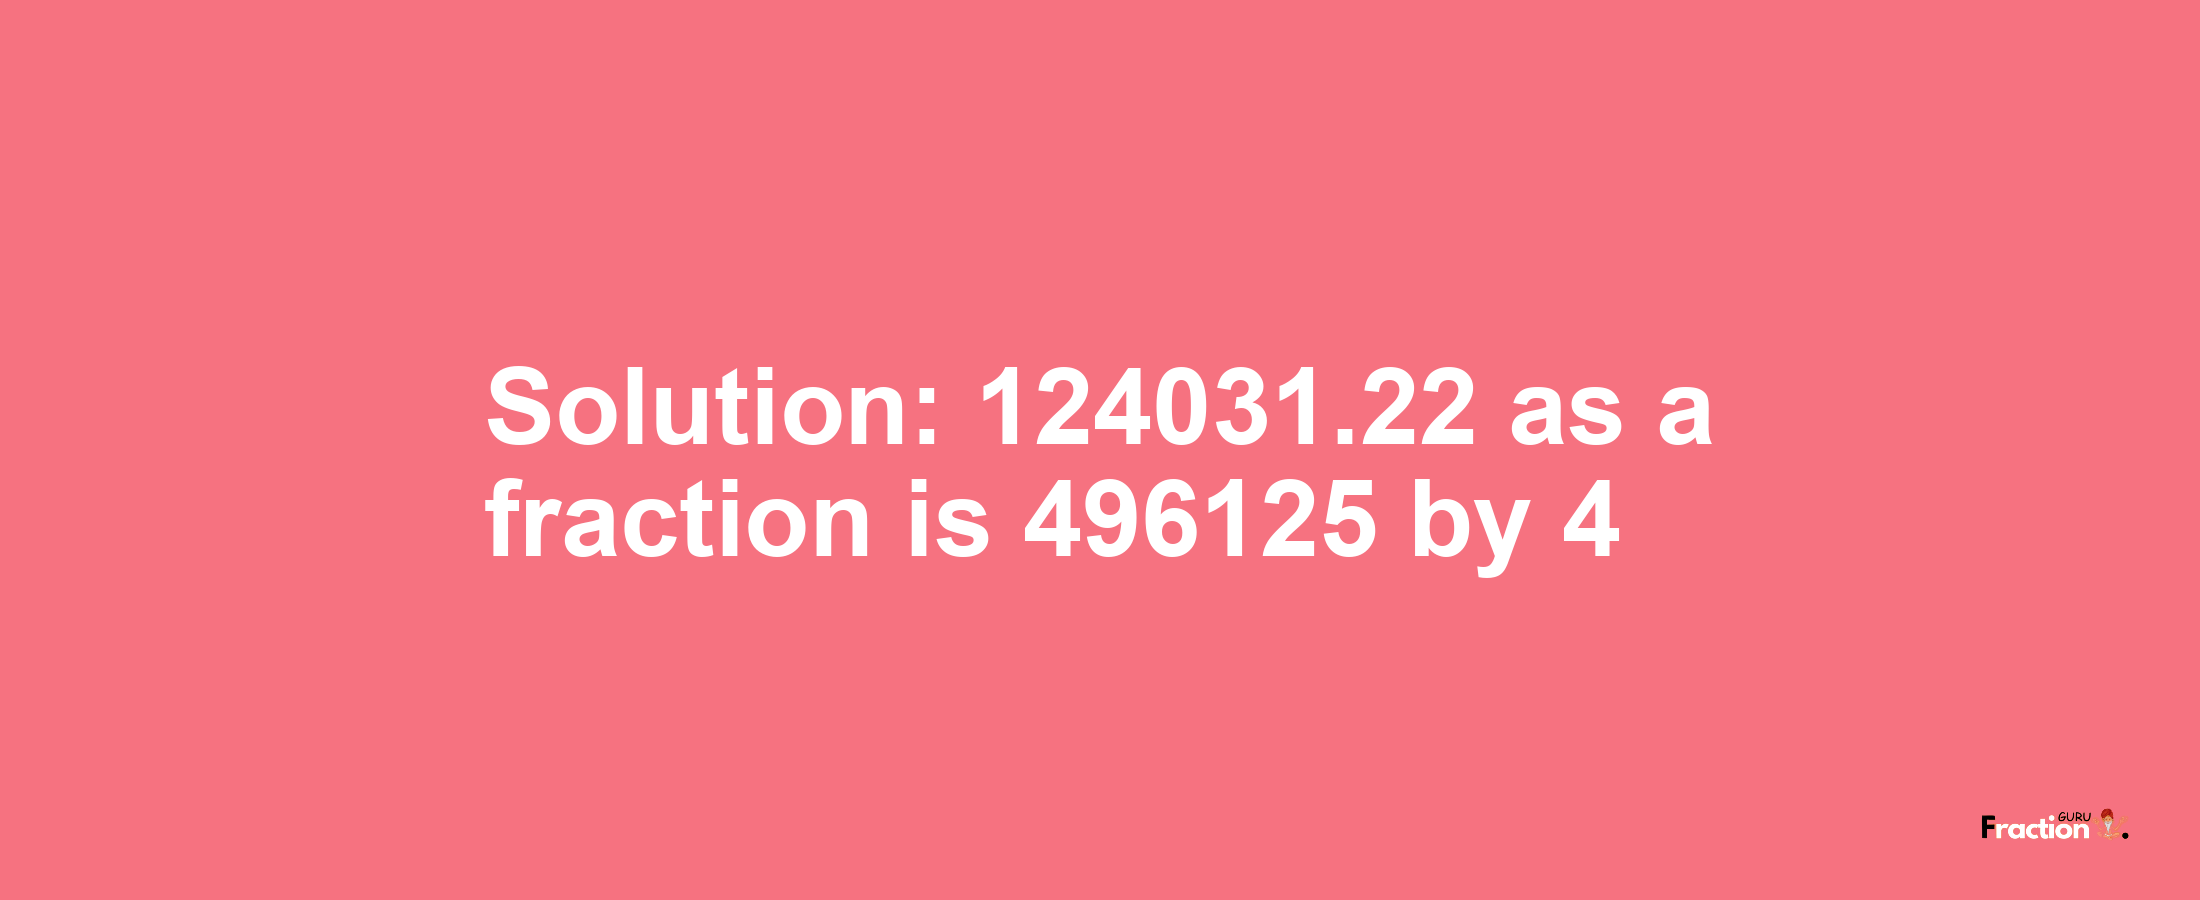 Solution:124031.22 as a fraction is 496125/4